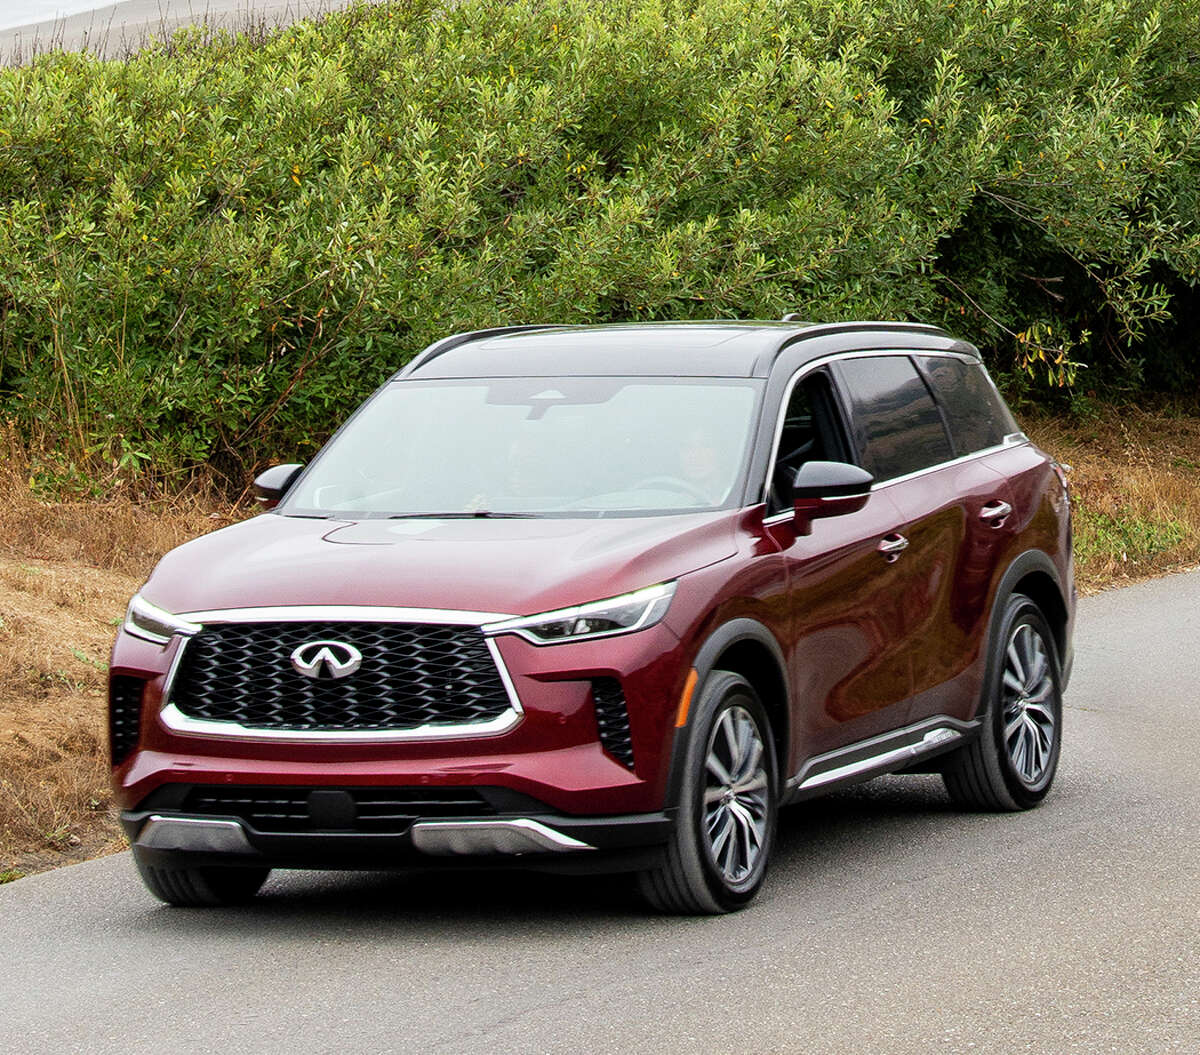 The redesigned 2022 Infiniti QX60 crossover comes with a new nine-speed automatic transmission.